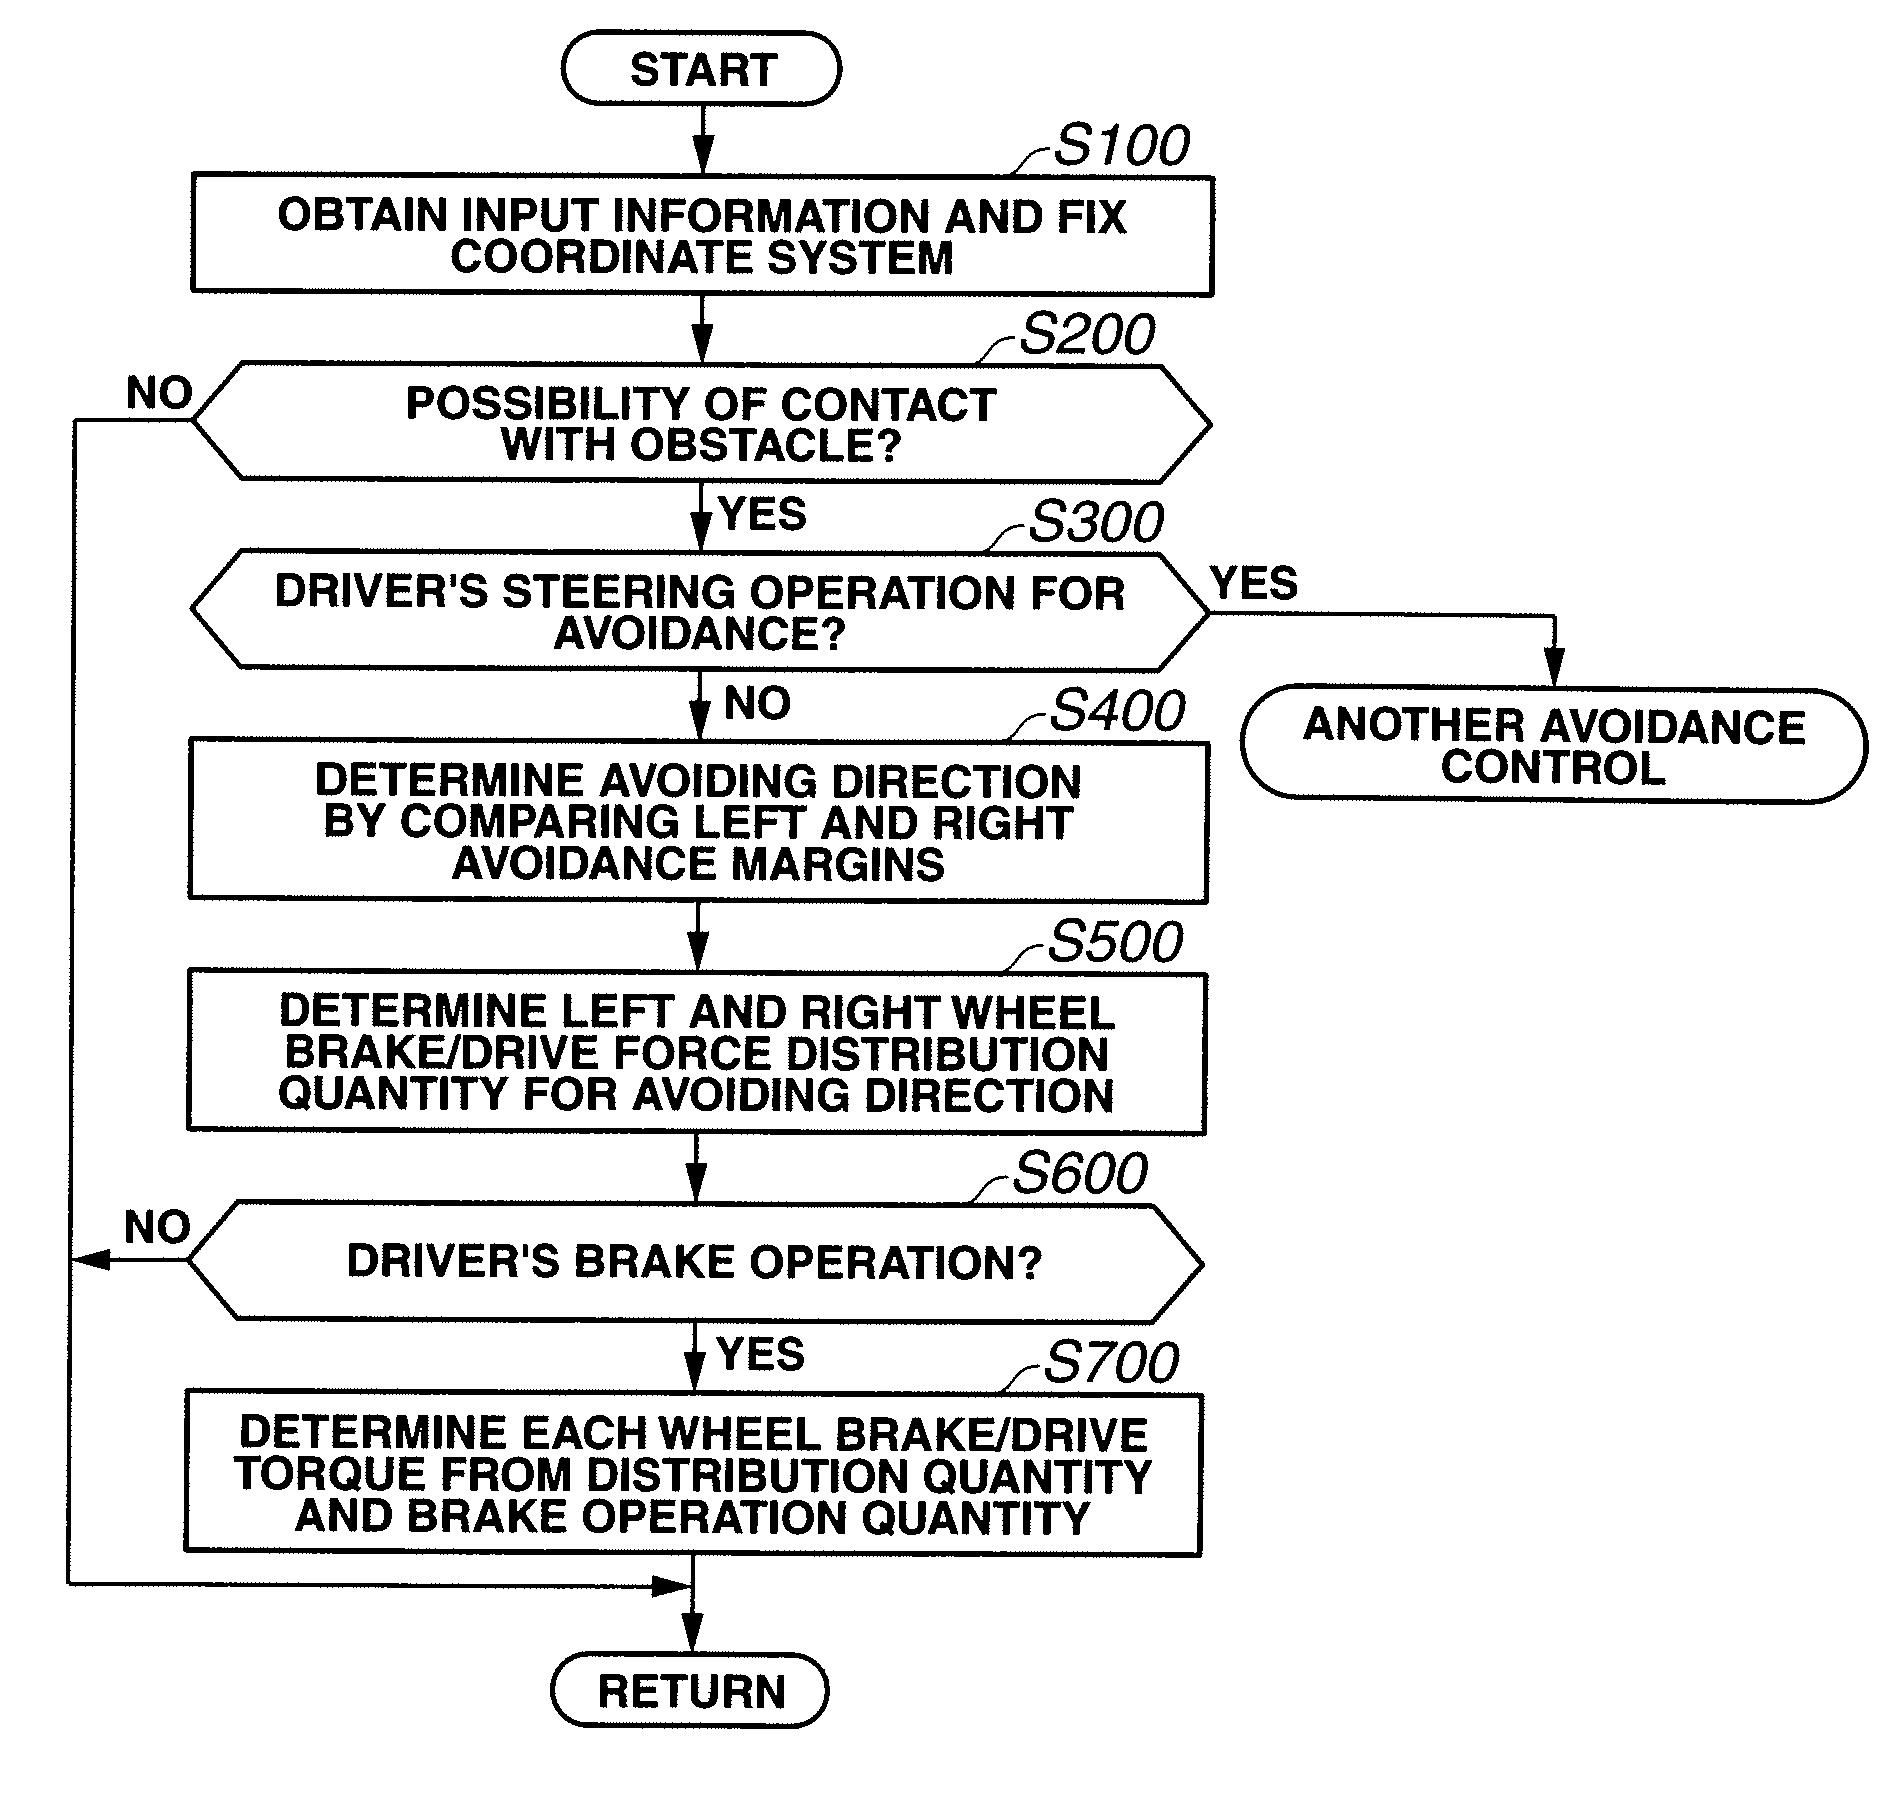 Apparatus and process for vehicle driving assistance